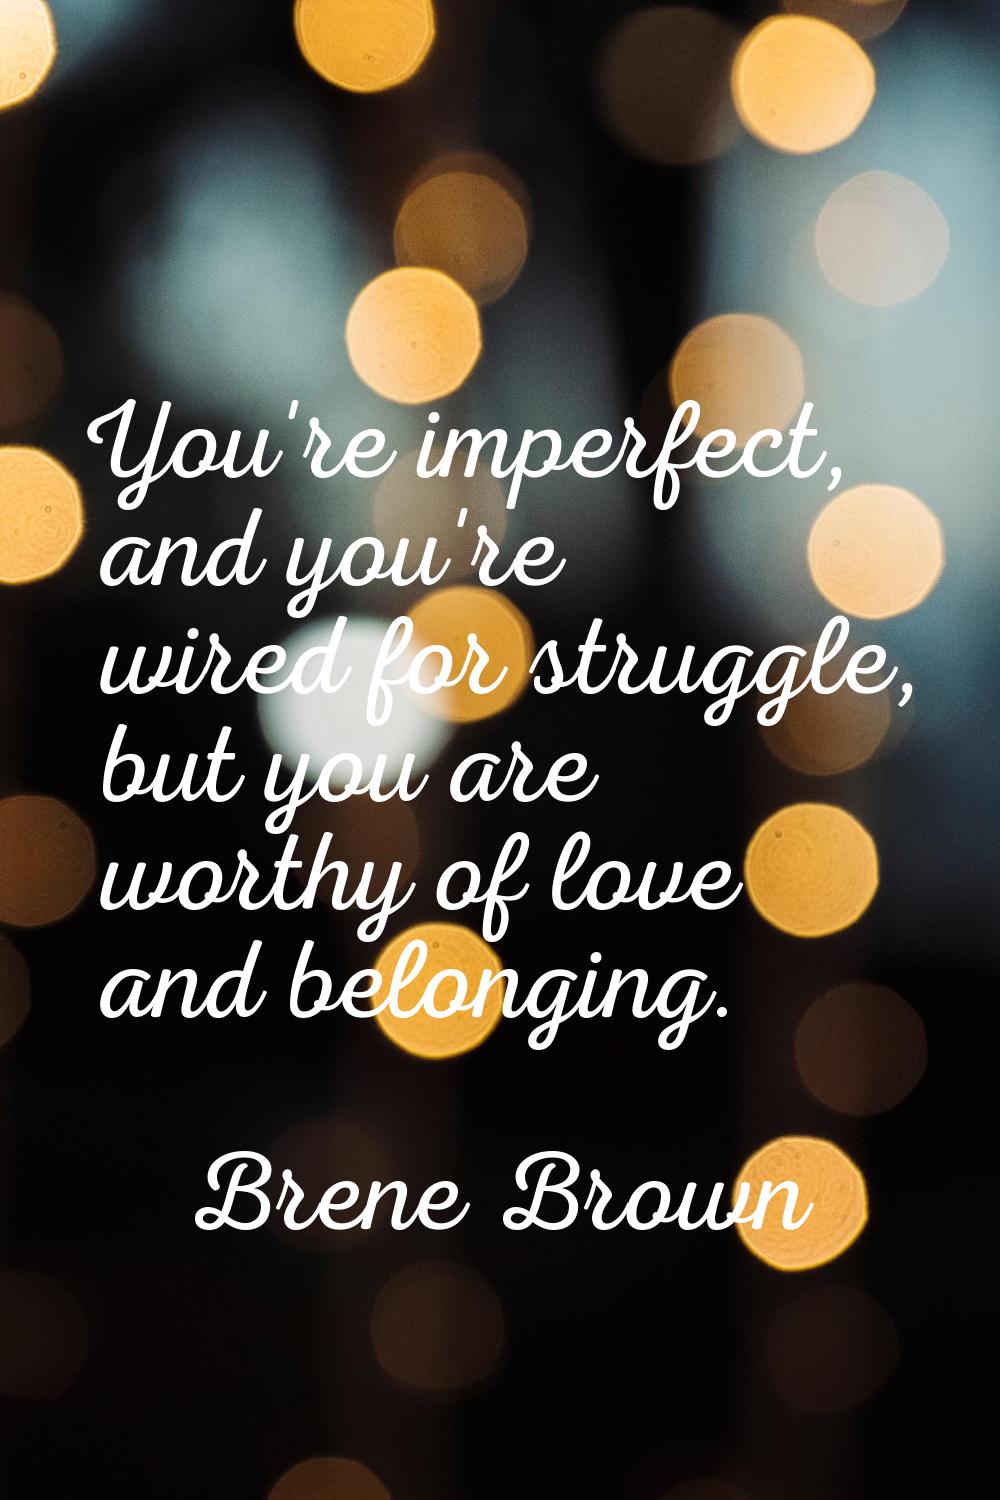 You're imperfect, and you're wired for struggle, but you are worthy of love and belonging.